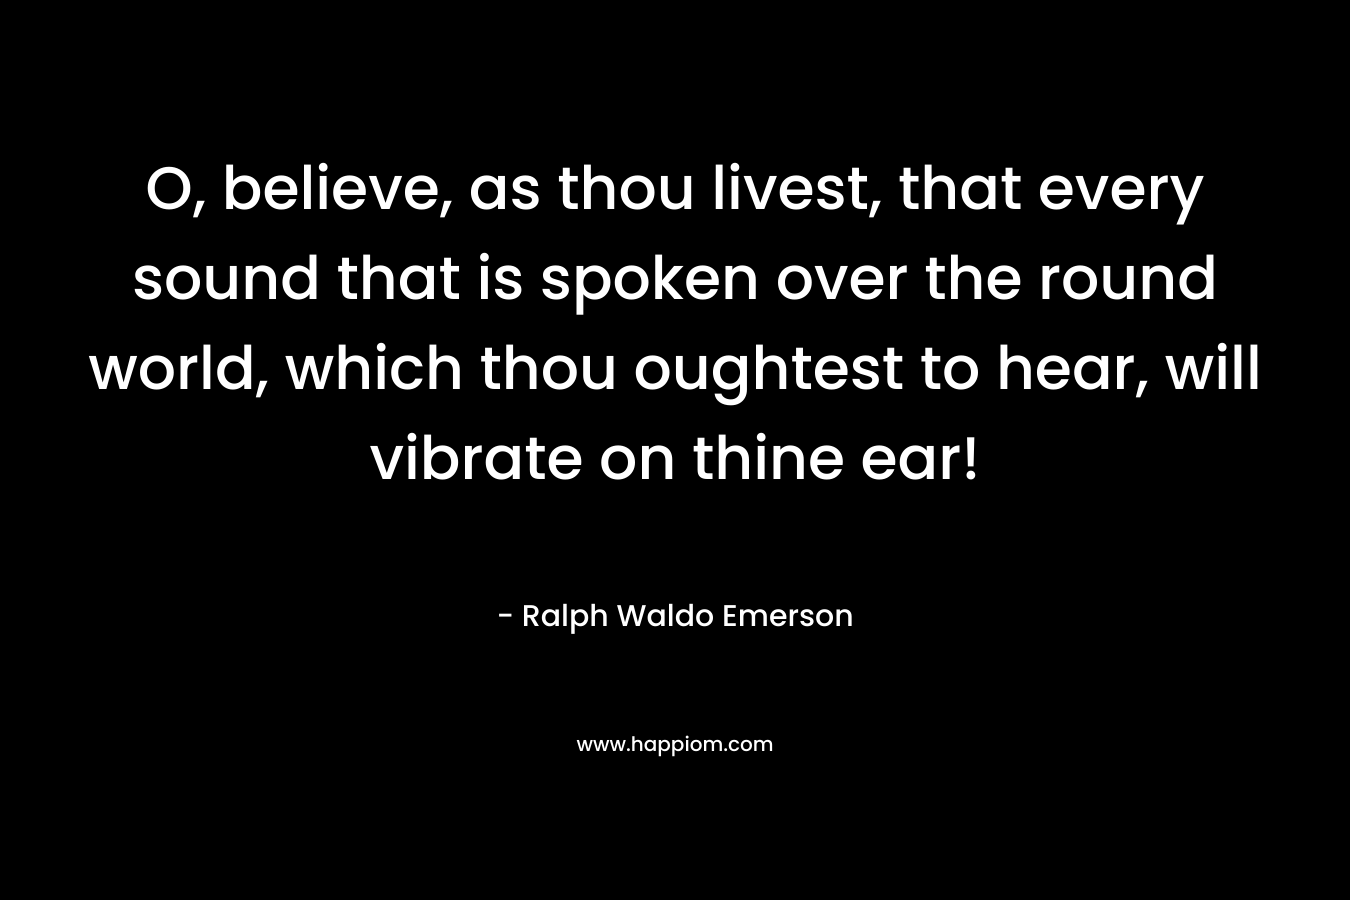 O, believe, as thou livest, that every sound that is spoken over the round world, which thou oughtest to hear, will vibrate on thine ear!